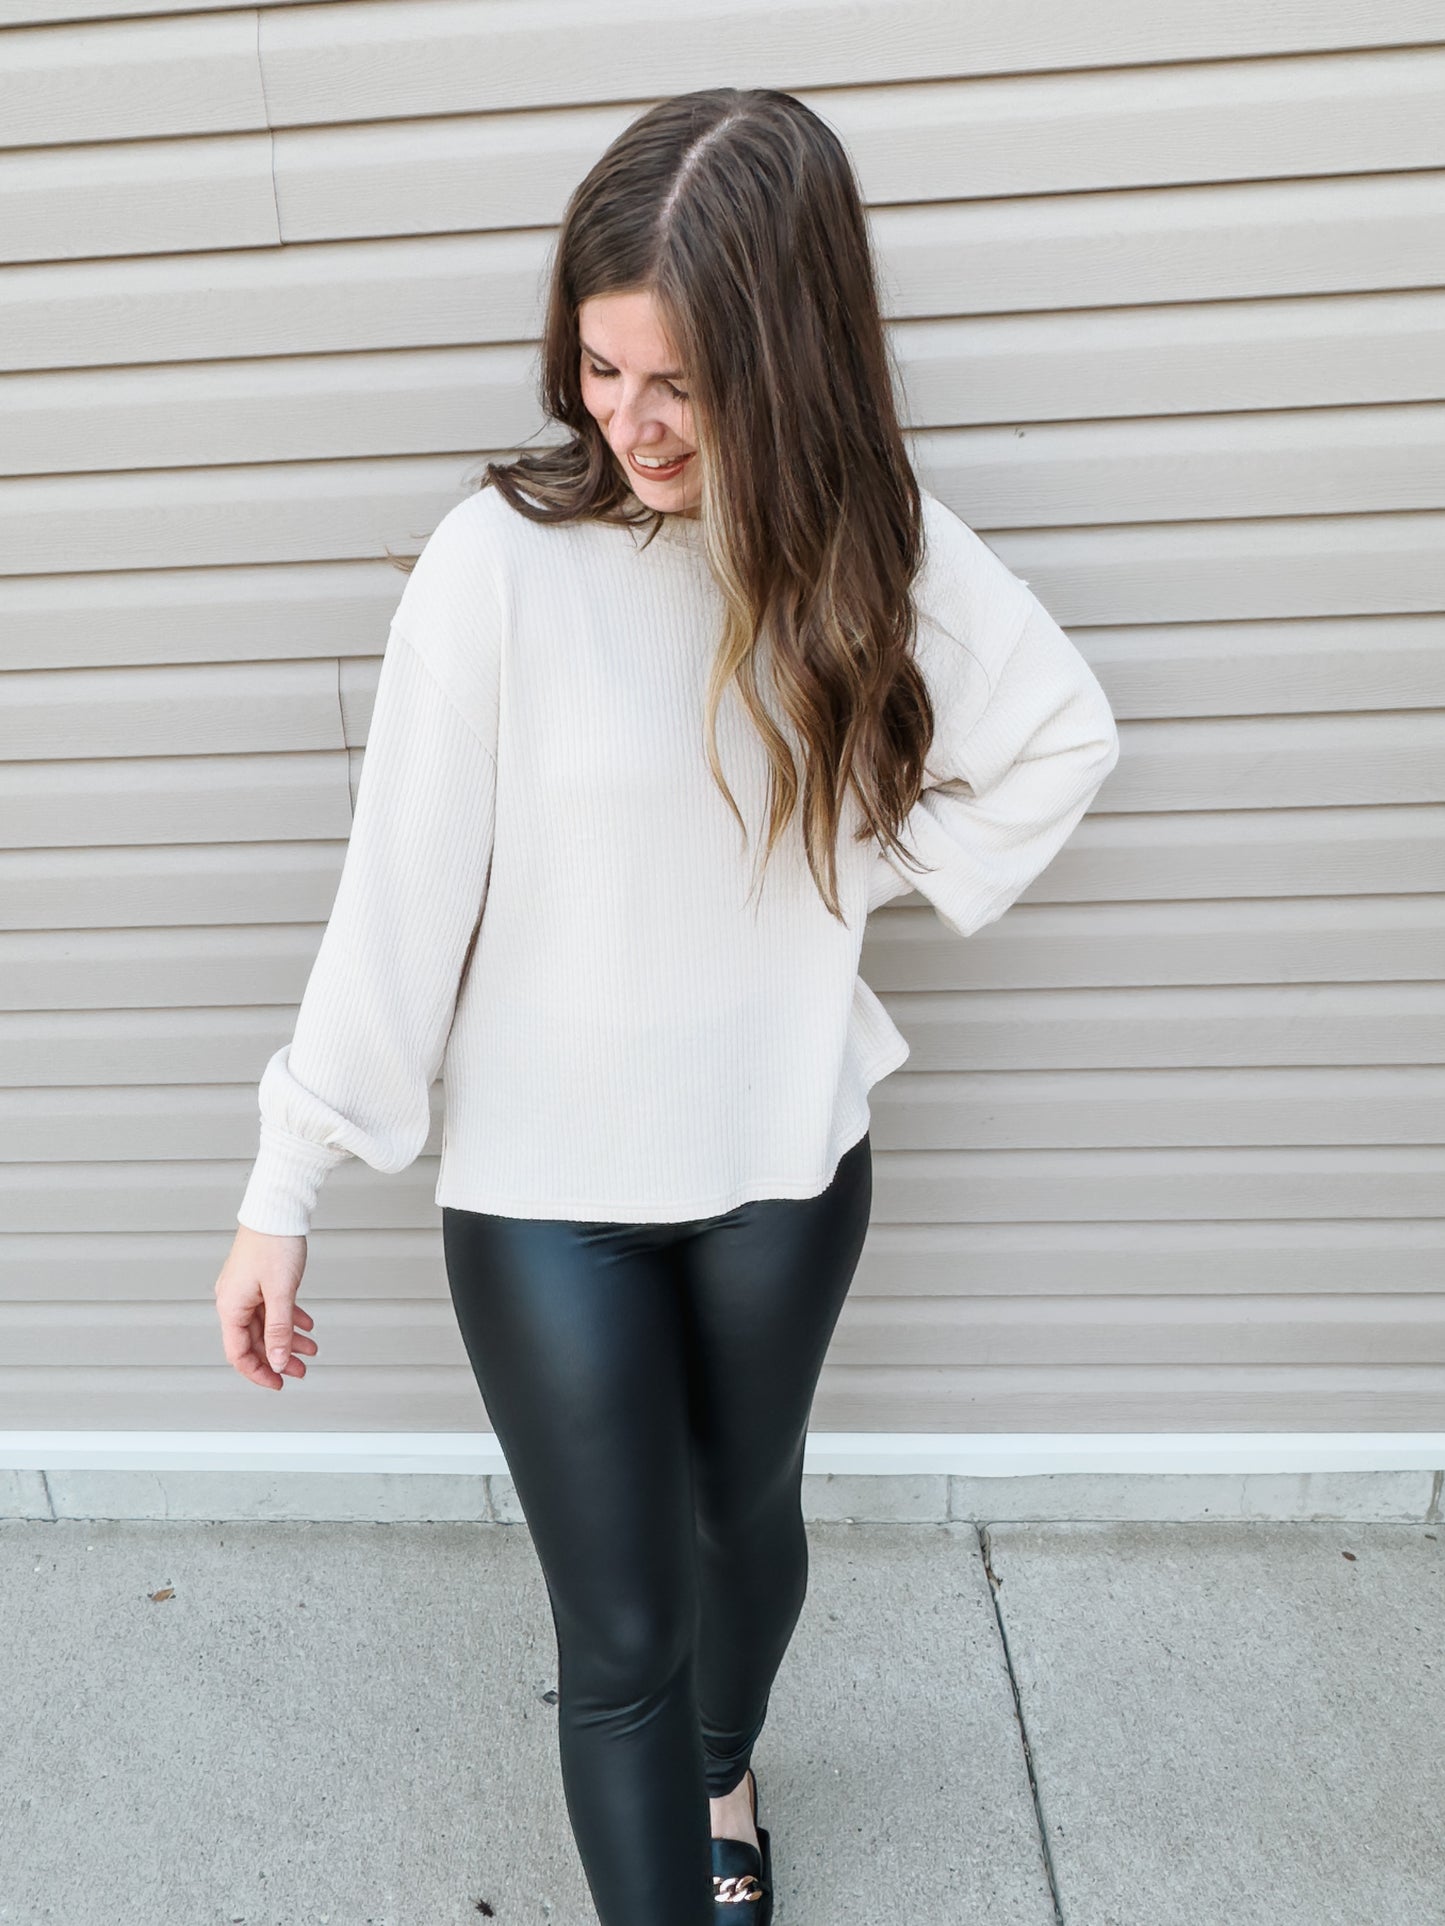 Stretch Faux Leather Leggings